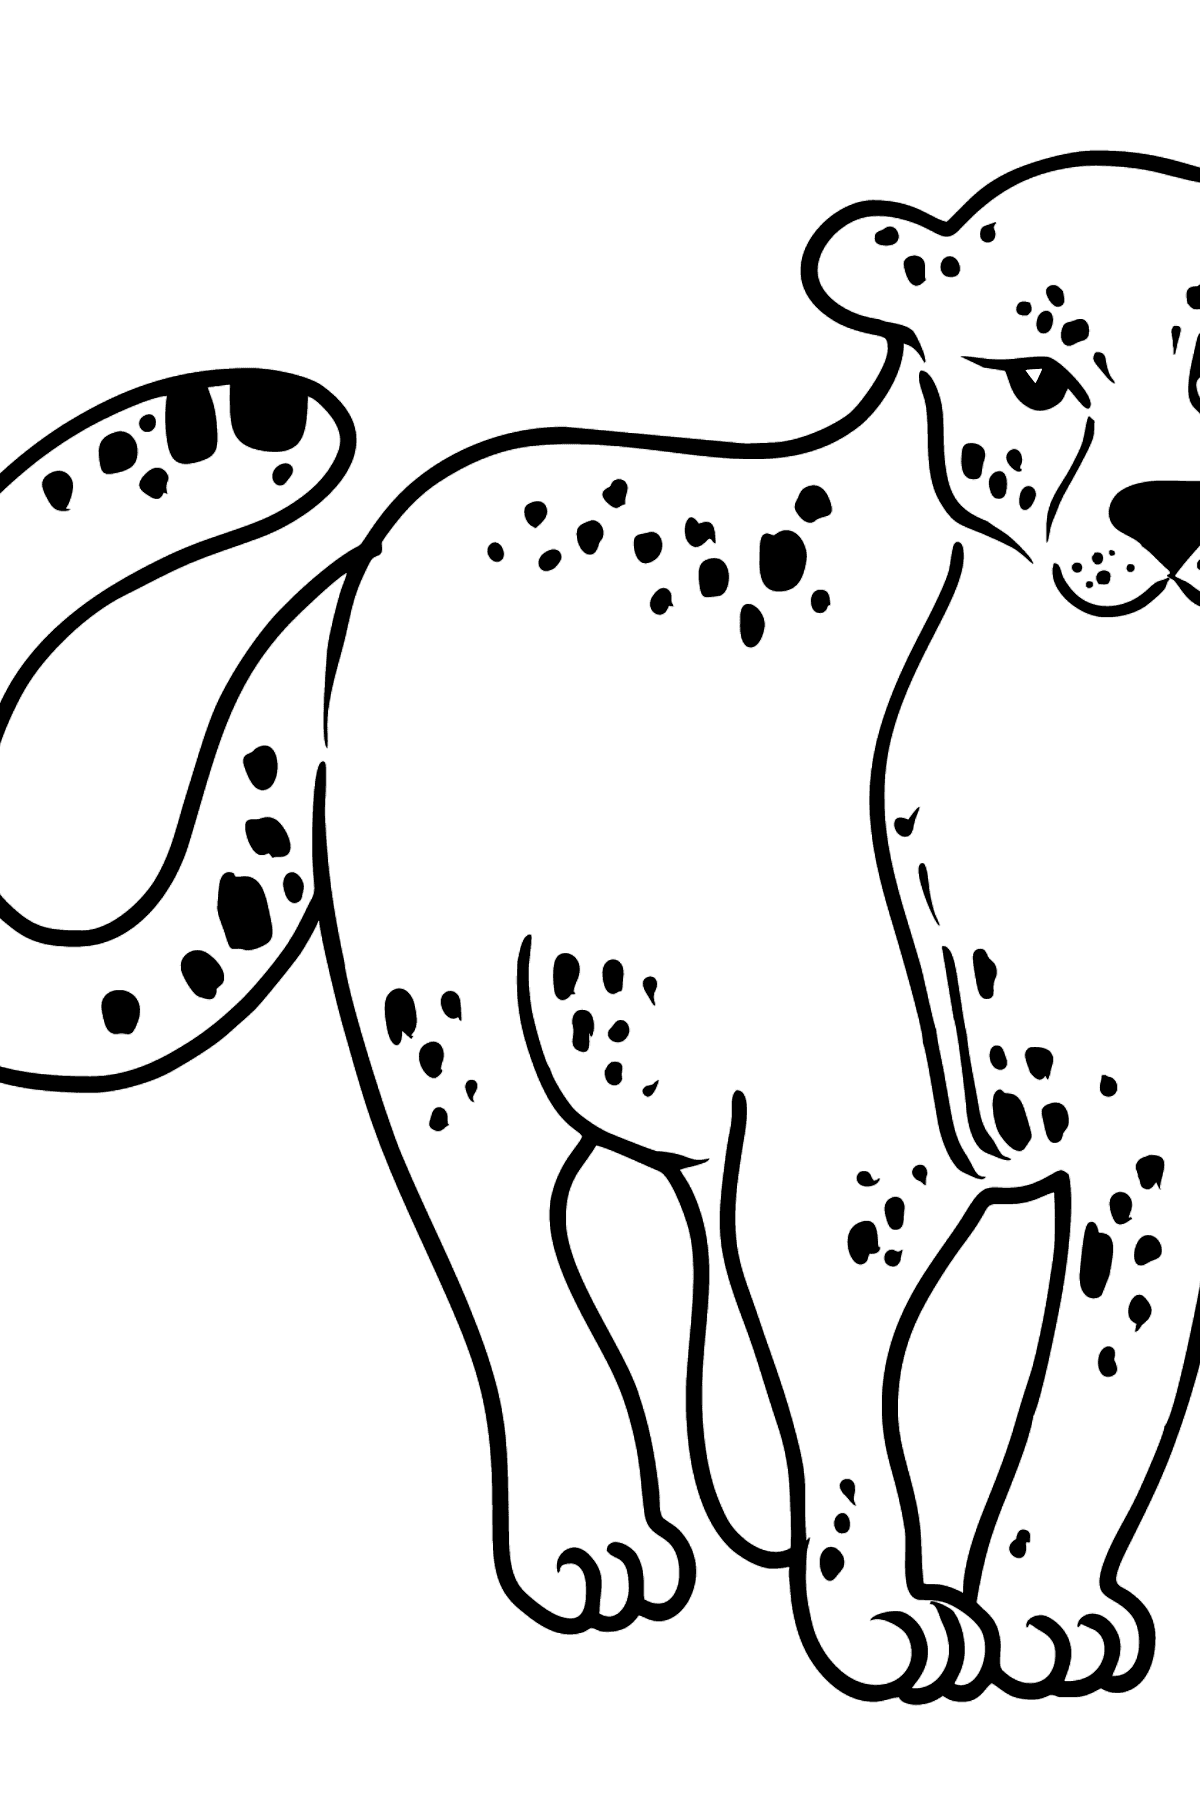 Leopard coloring page - Coloring Pages for Kids